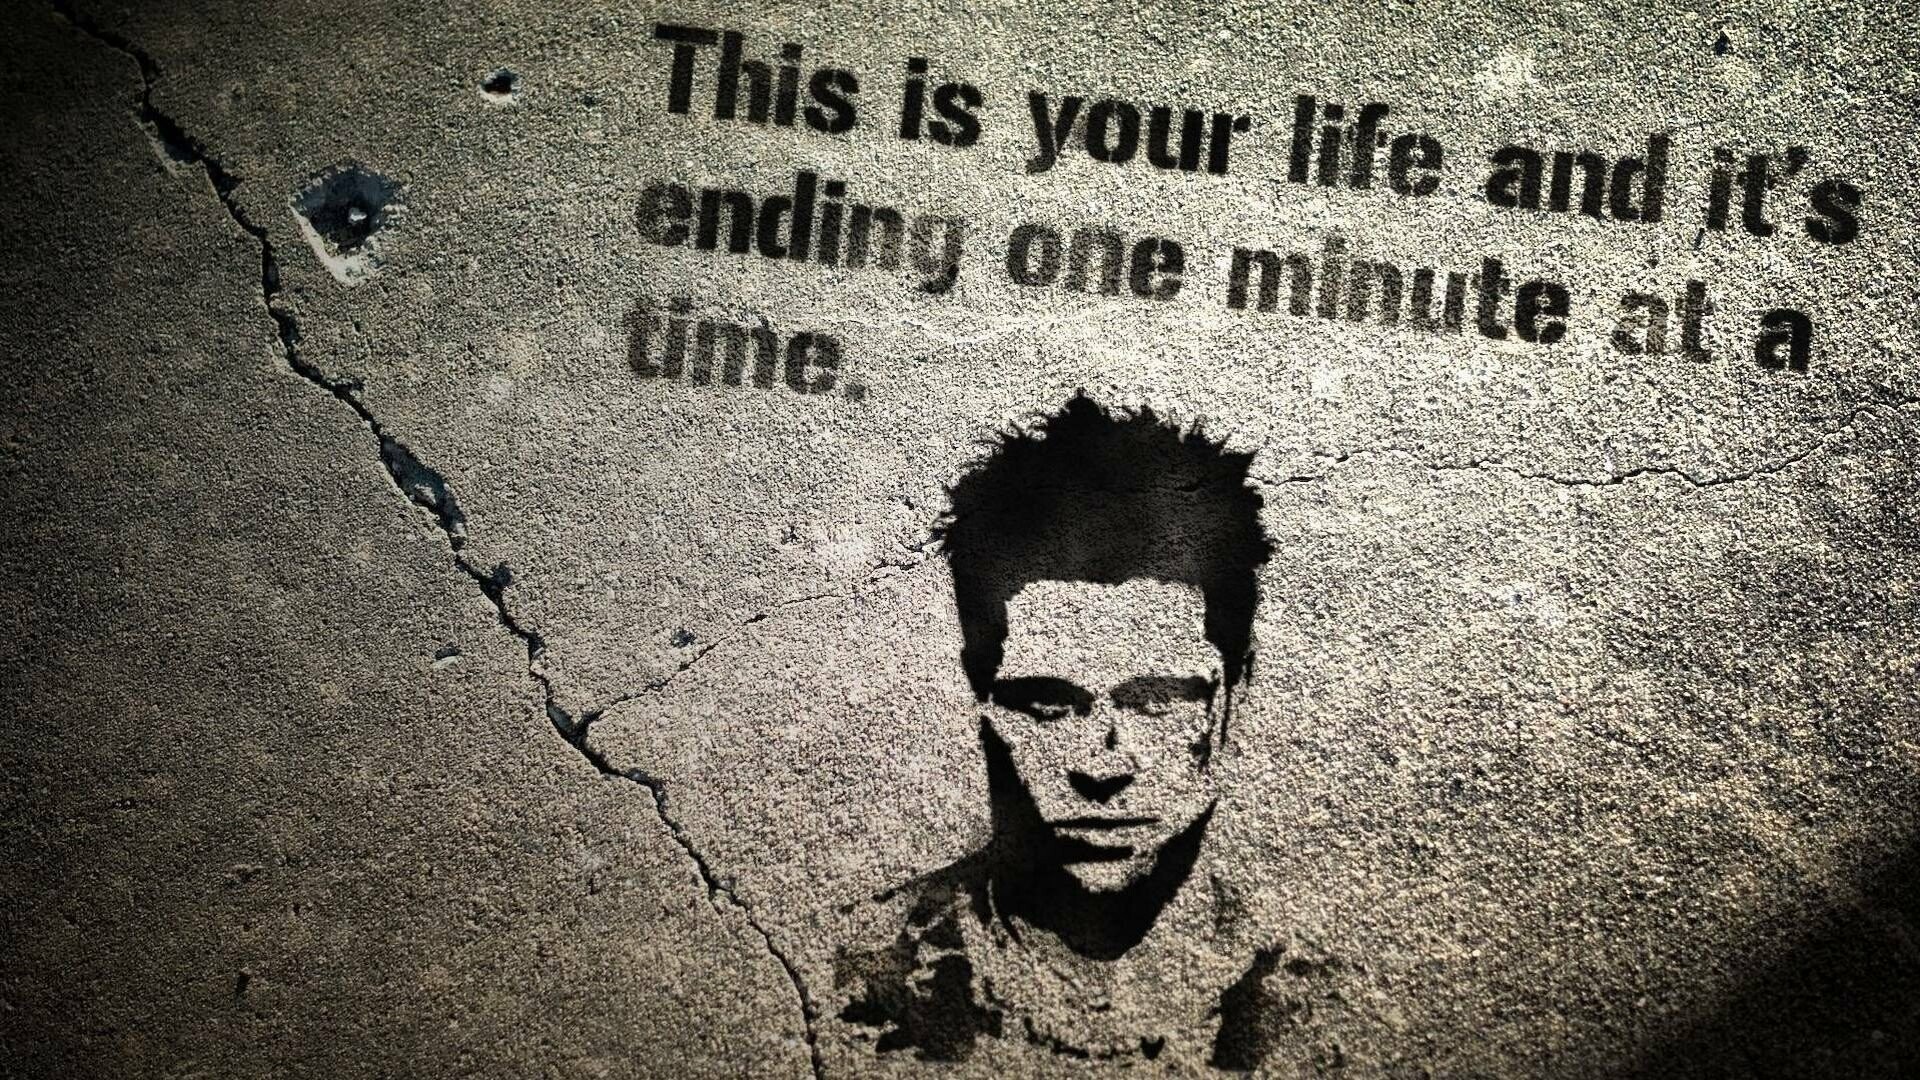 Fight Club: This is your life and it's ending one minute at a time, Tyler Durden. 1920x1080 Full HD Wallpaper.